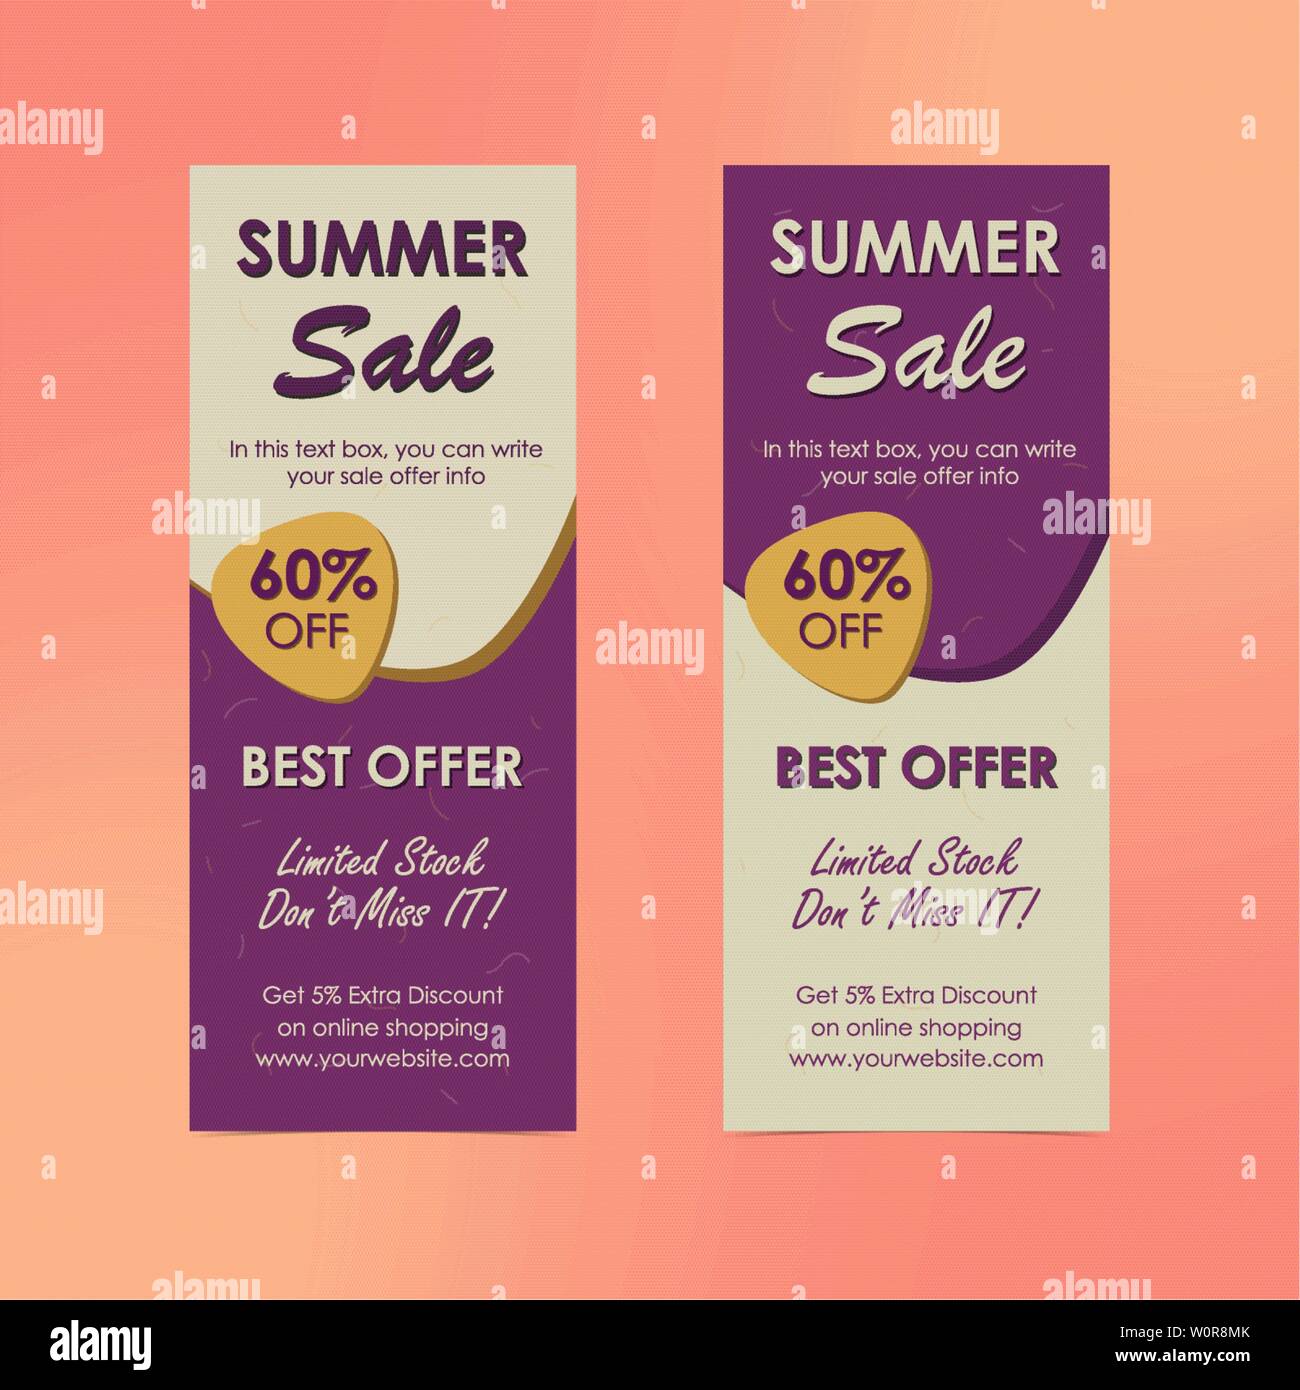 Summer sale banner template, Promo design template for your seasonal promotion. Stock Vector